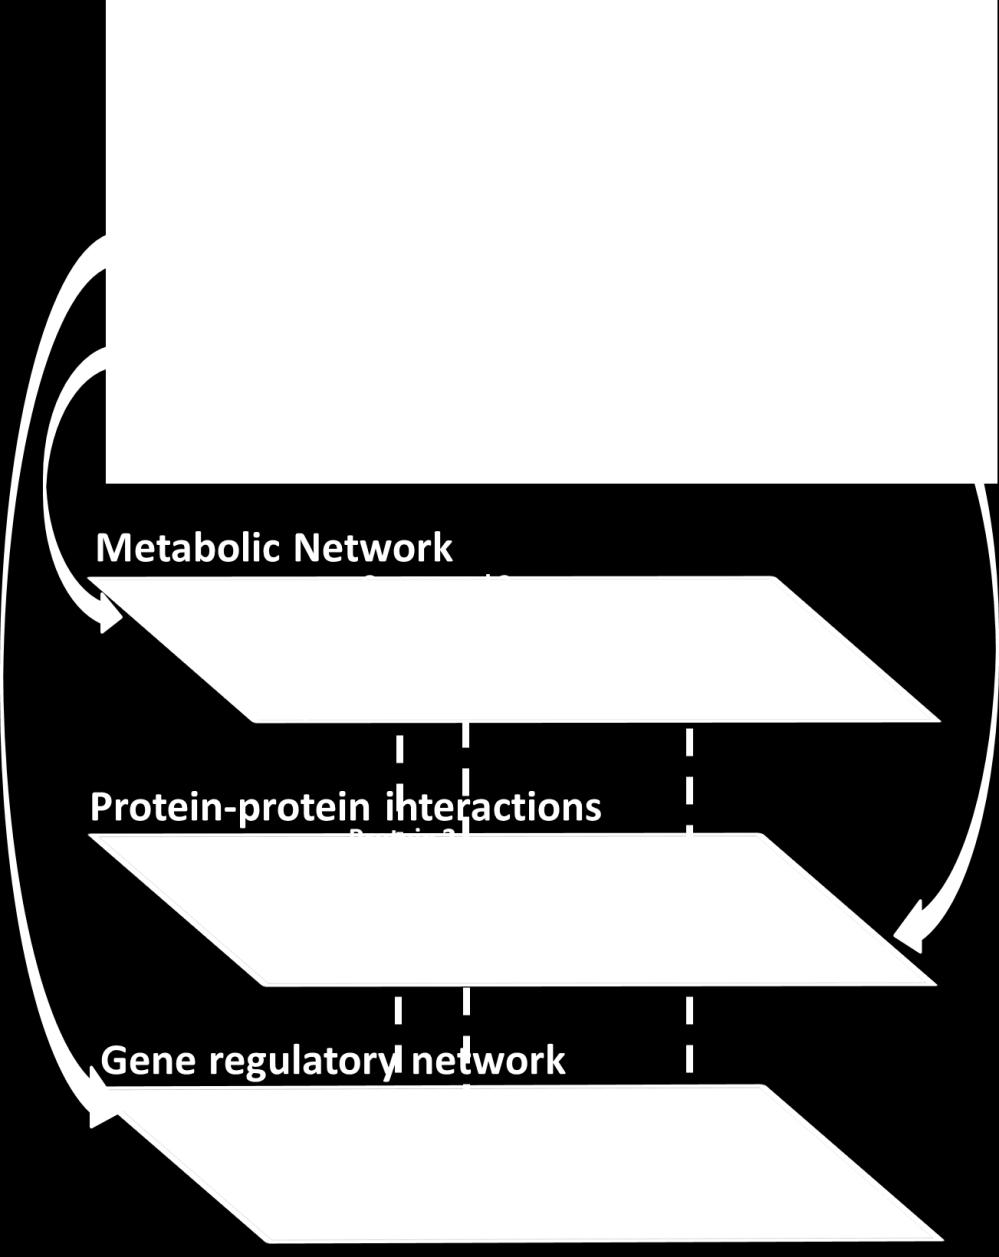 Integrate the gene regulations into the metabolic network.